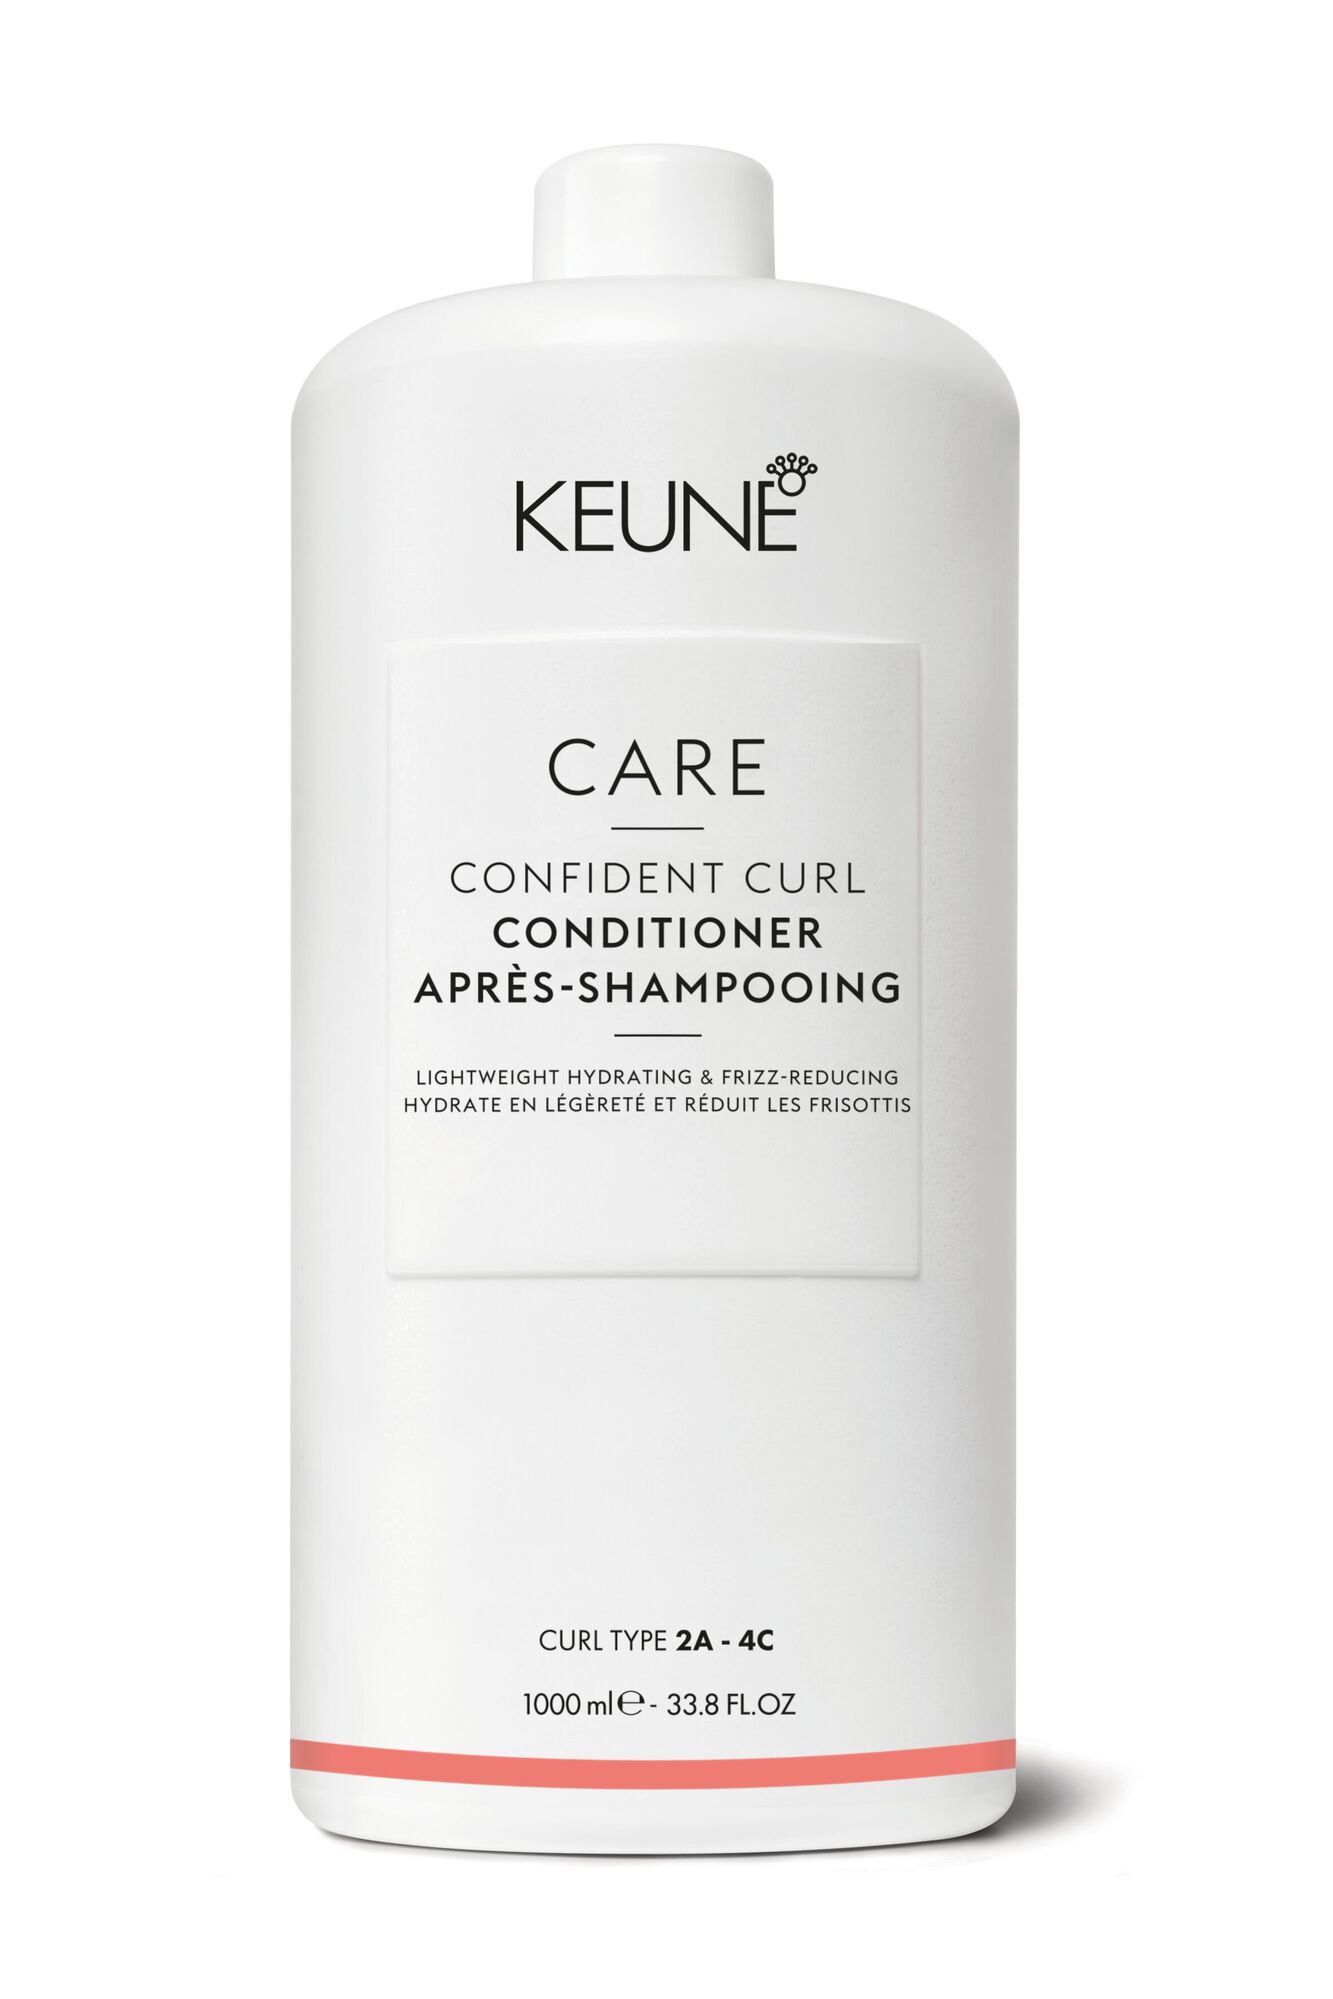 The Confident Curl Conditioner is the perfect choice for curly hair. This hair care product is designed to minimize frizz and make your waves and curls easier to manage. On keune.ch.